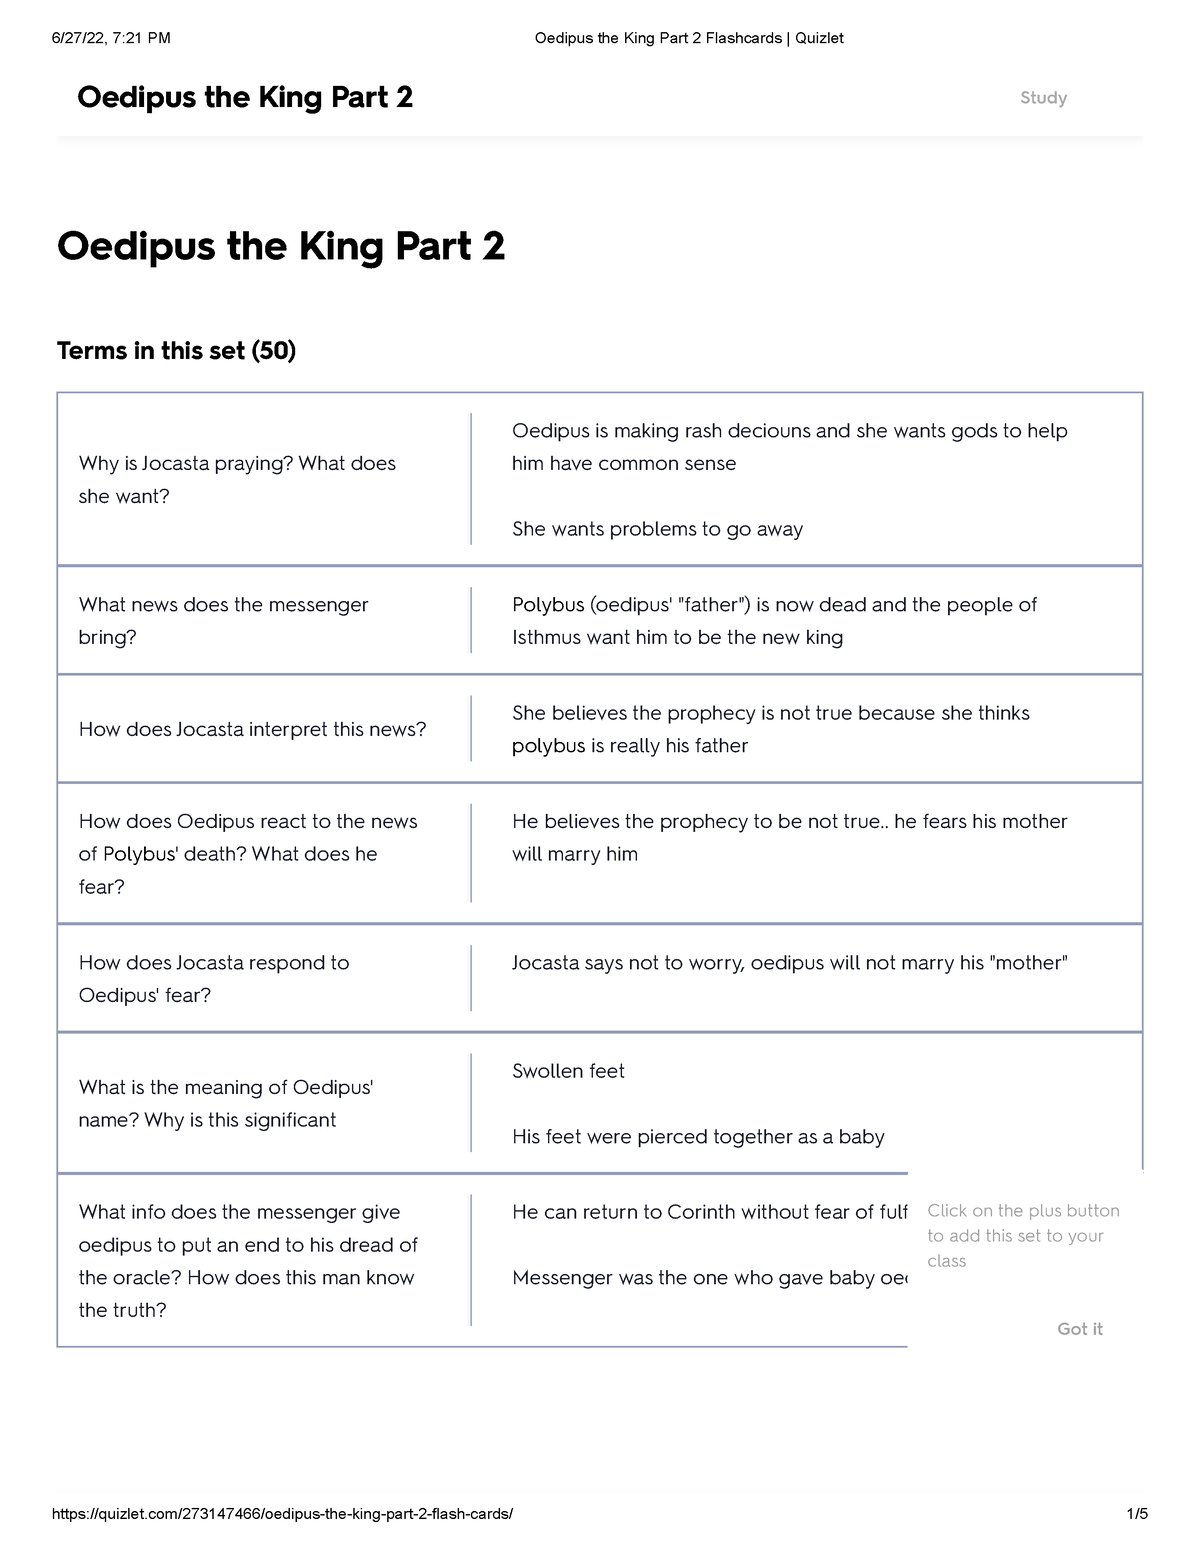 essay questions for oedipus the king